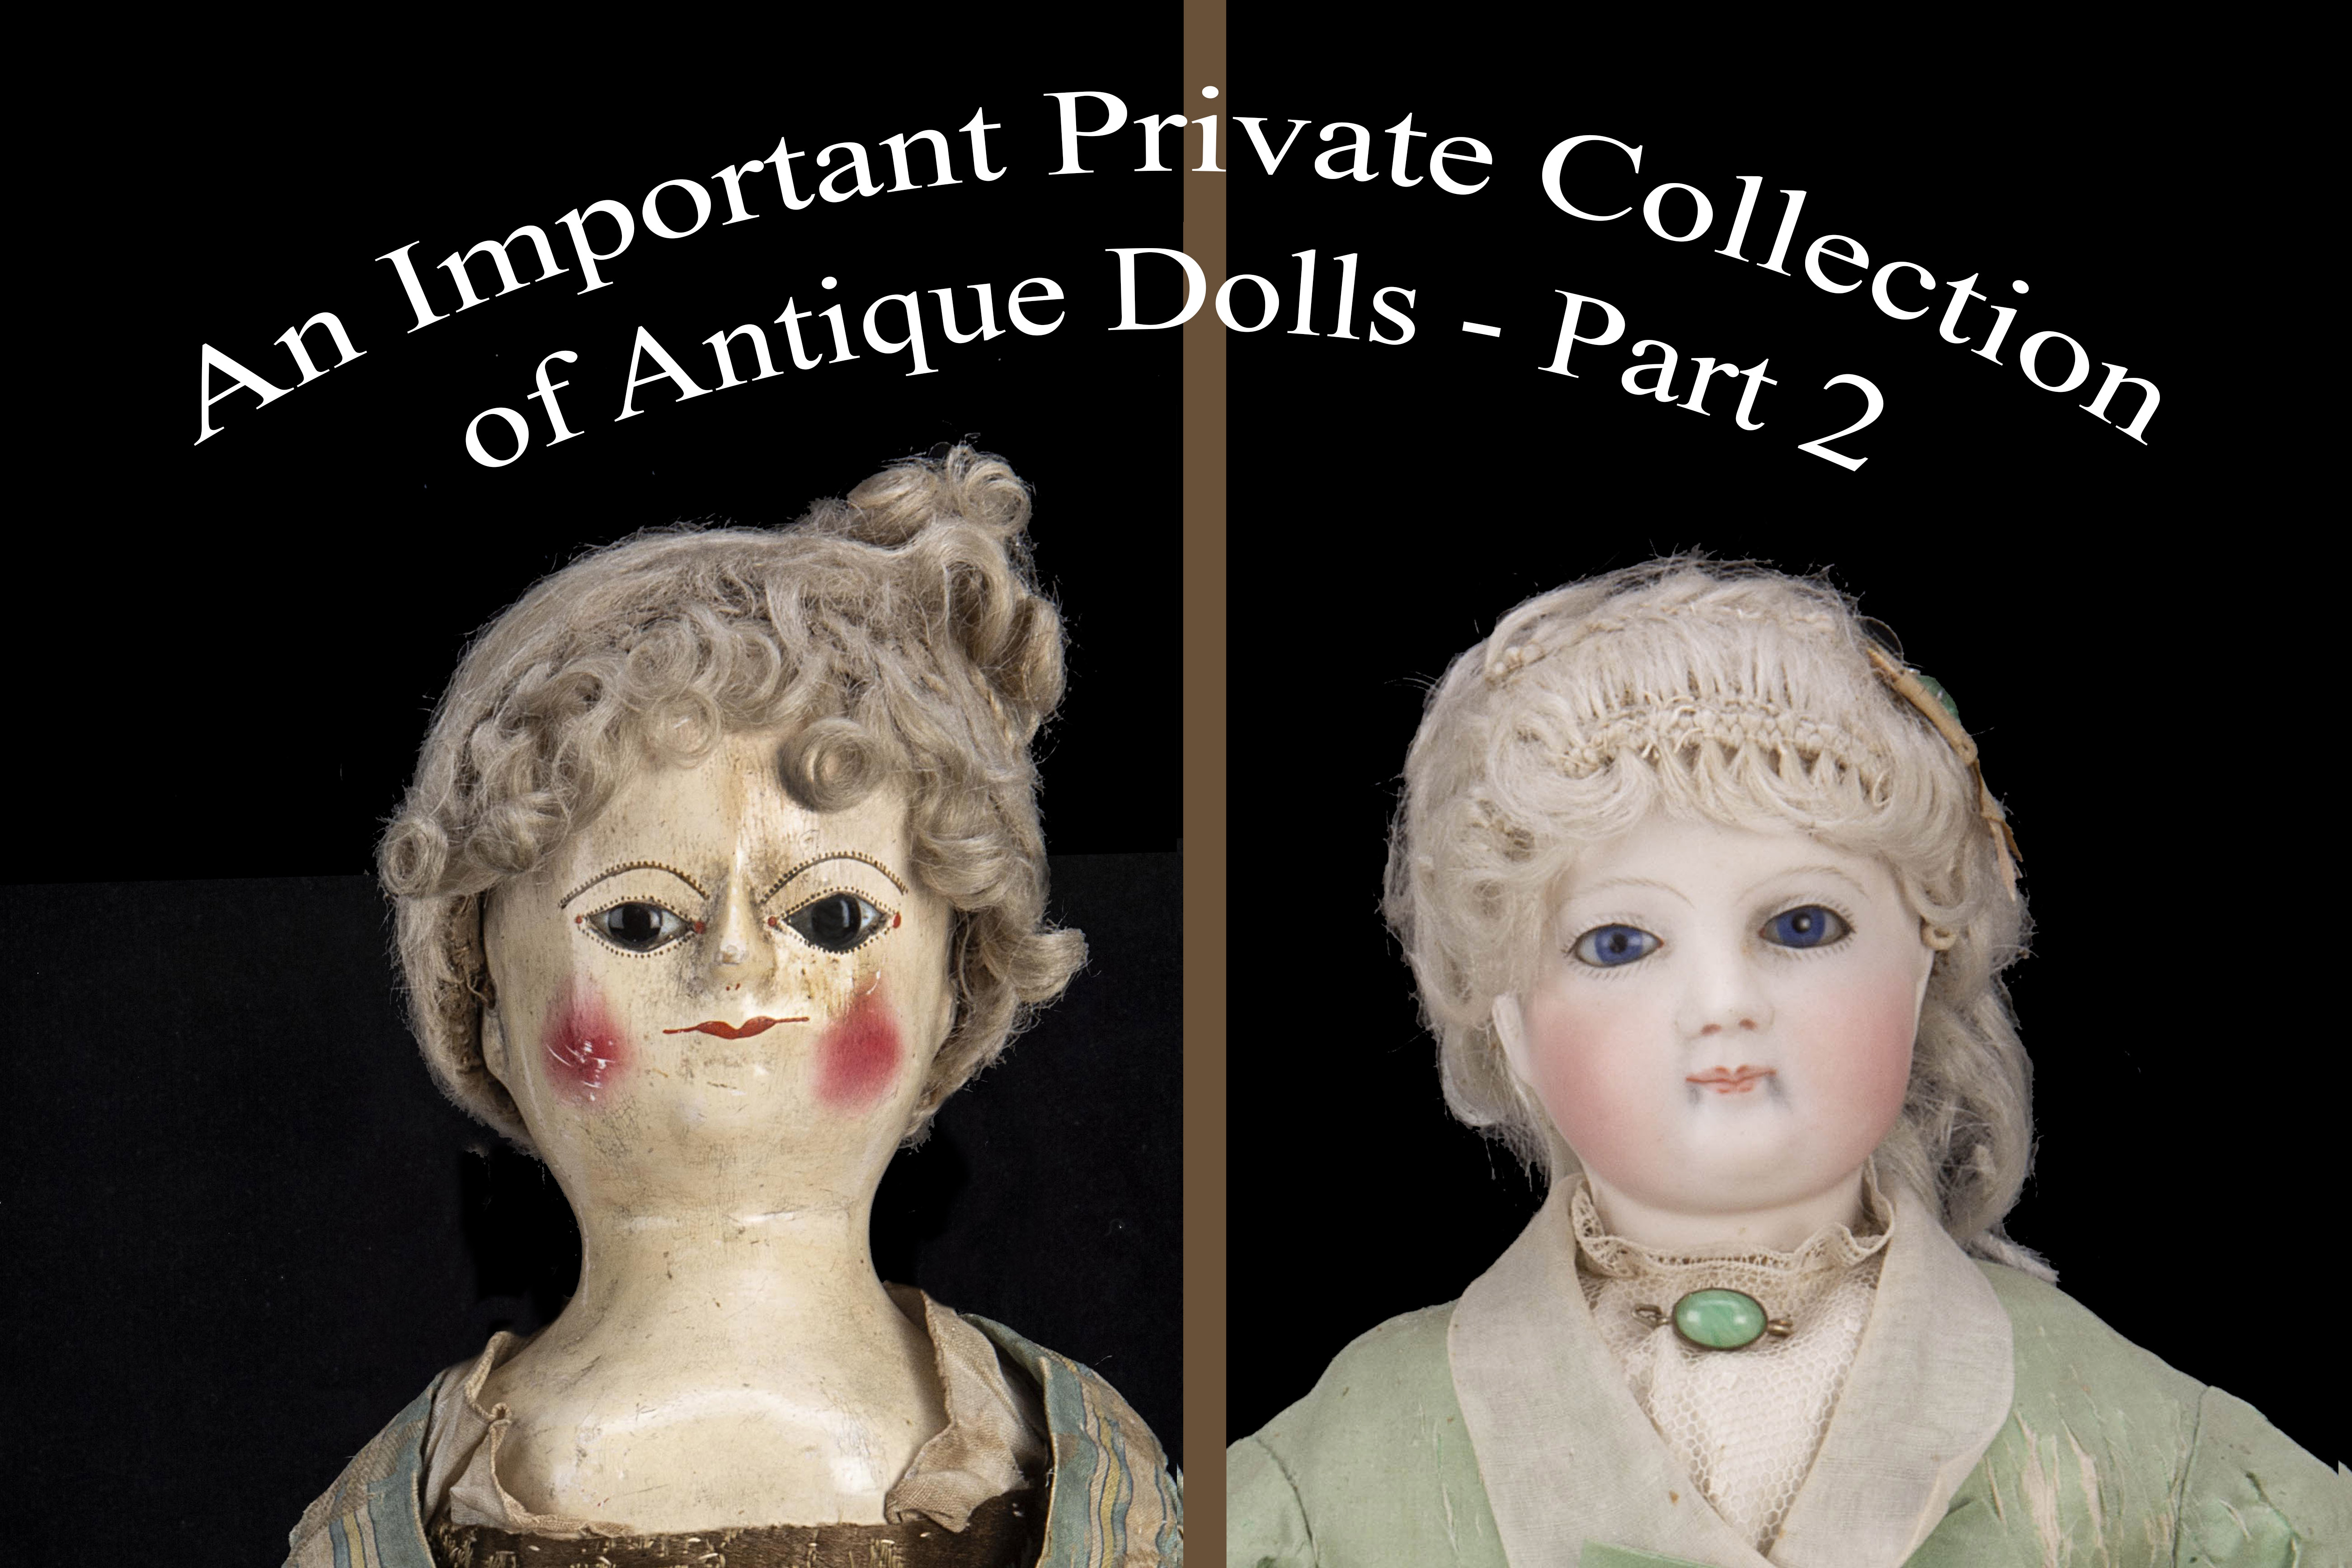 The Austin Smith and Margaret Harkin Antique Doll Collection - Part 2